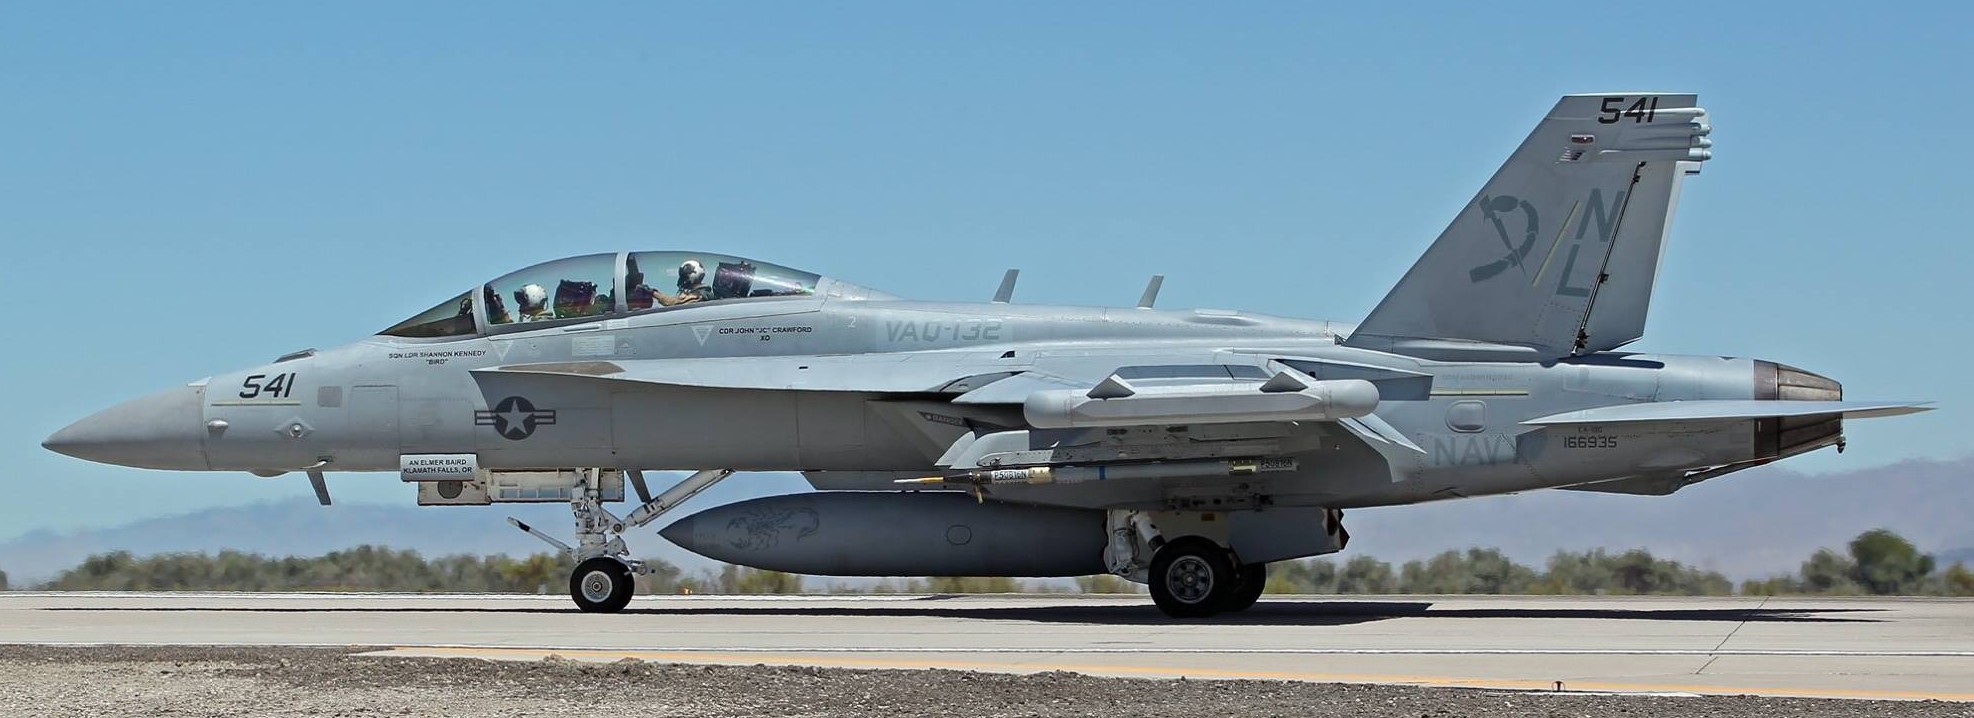 vaq-132 scorpions electronic attack squadron vaqron us navy boeing ea-18g growler nellis afb nevada 19